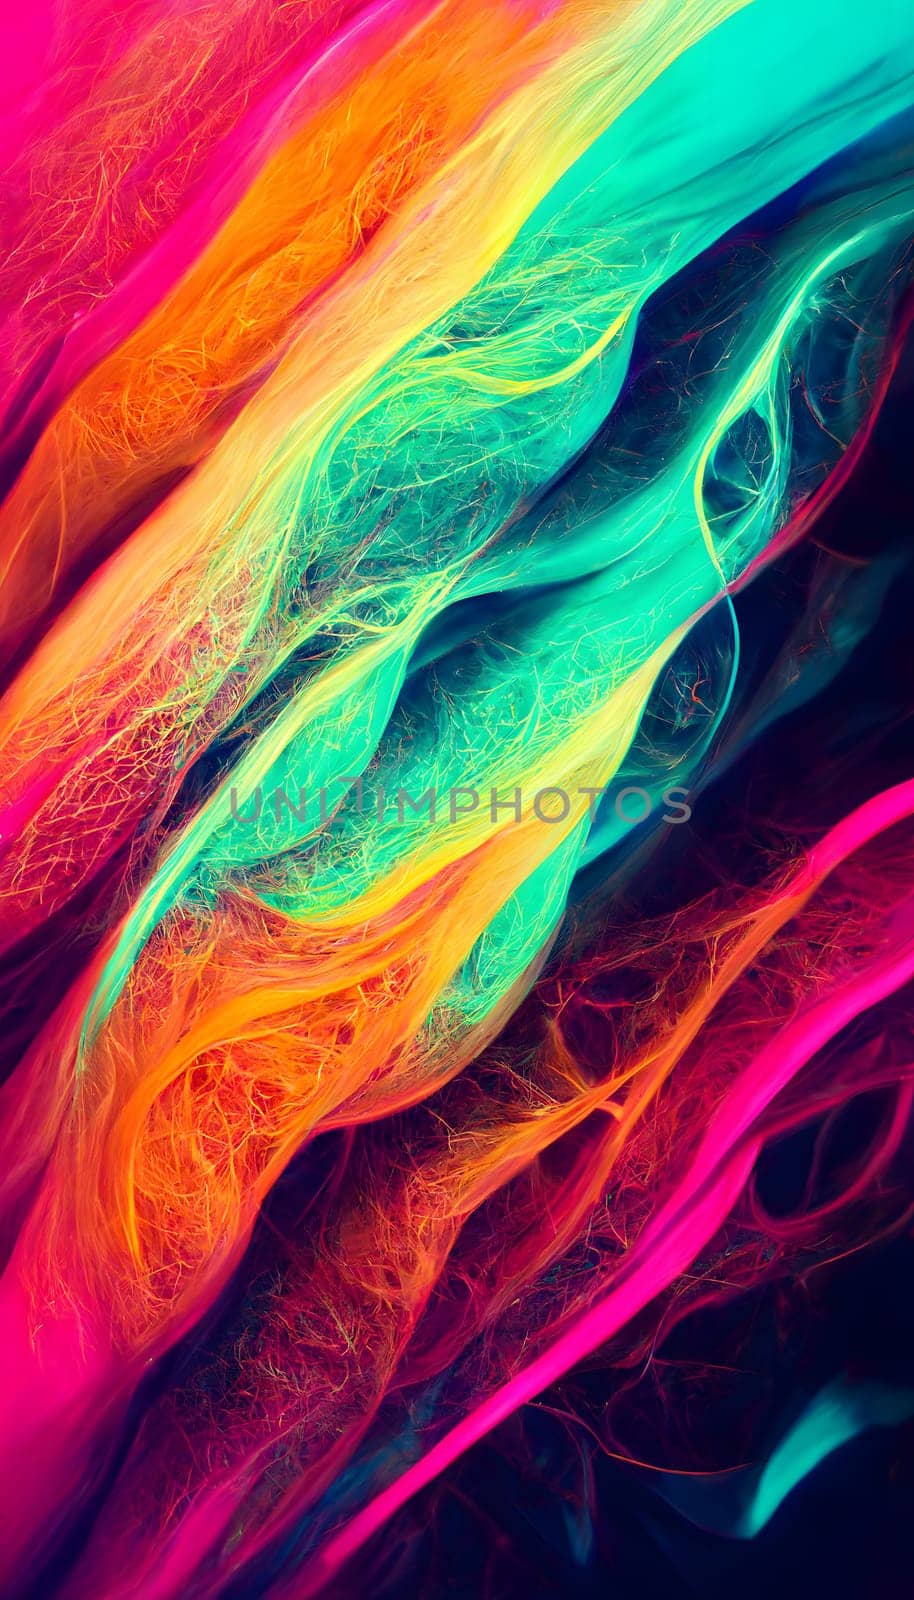 abstract colorful neon fibers background, neural network generated art. Digitally generated image. Not based on any actual scene or pattern.